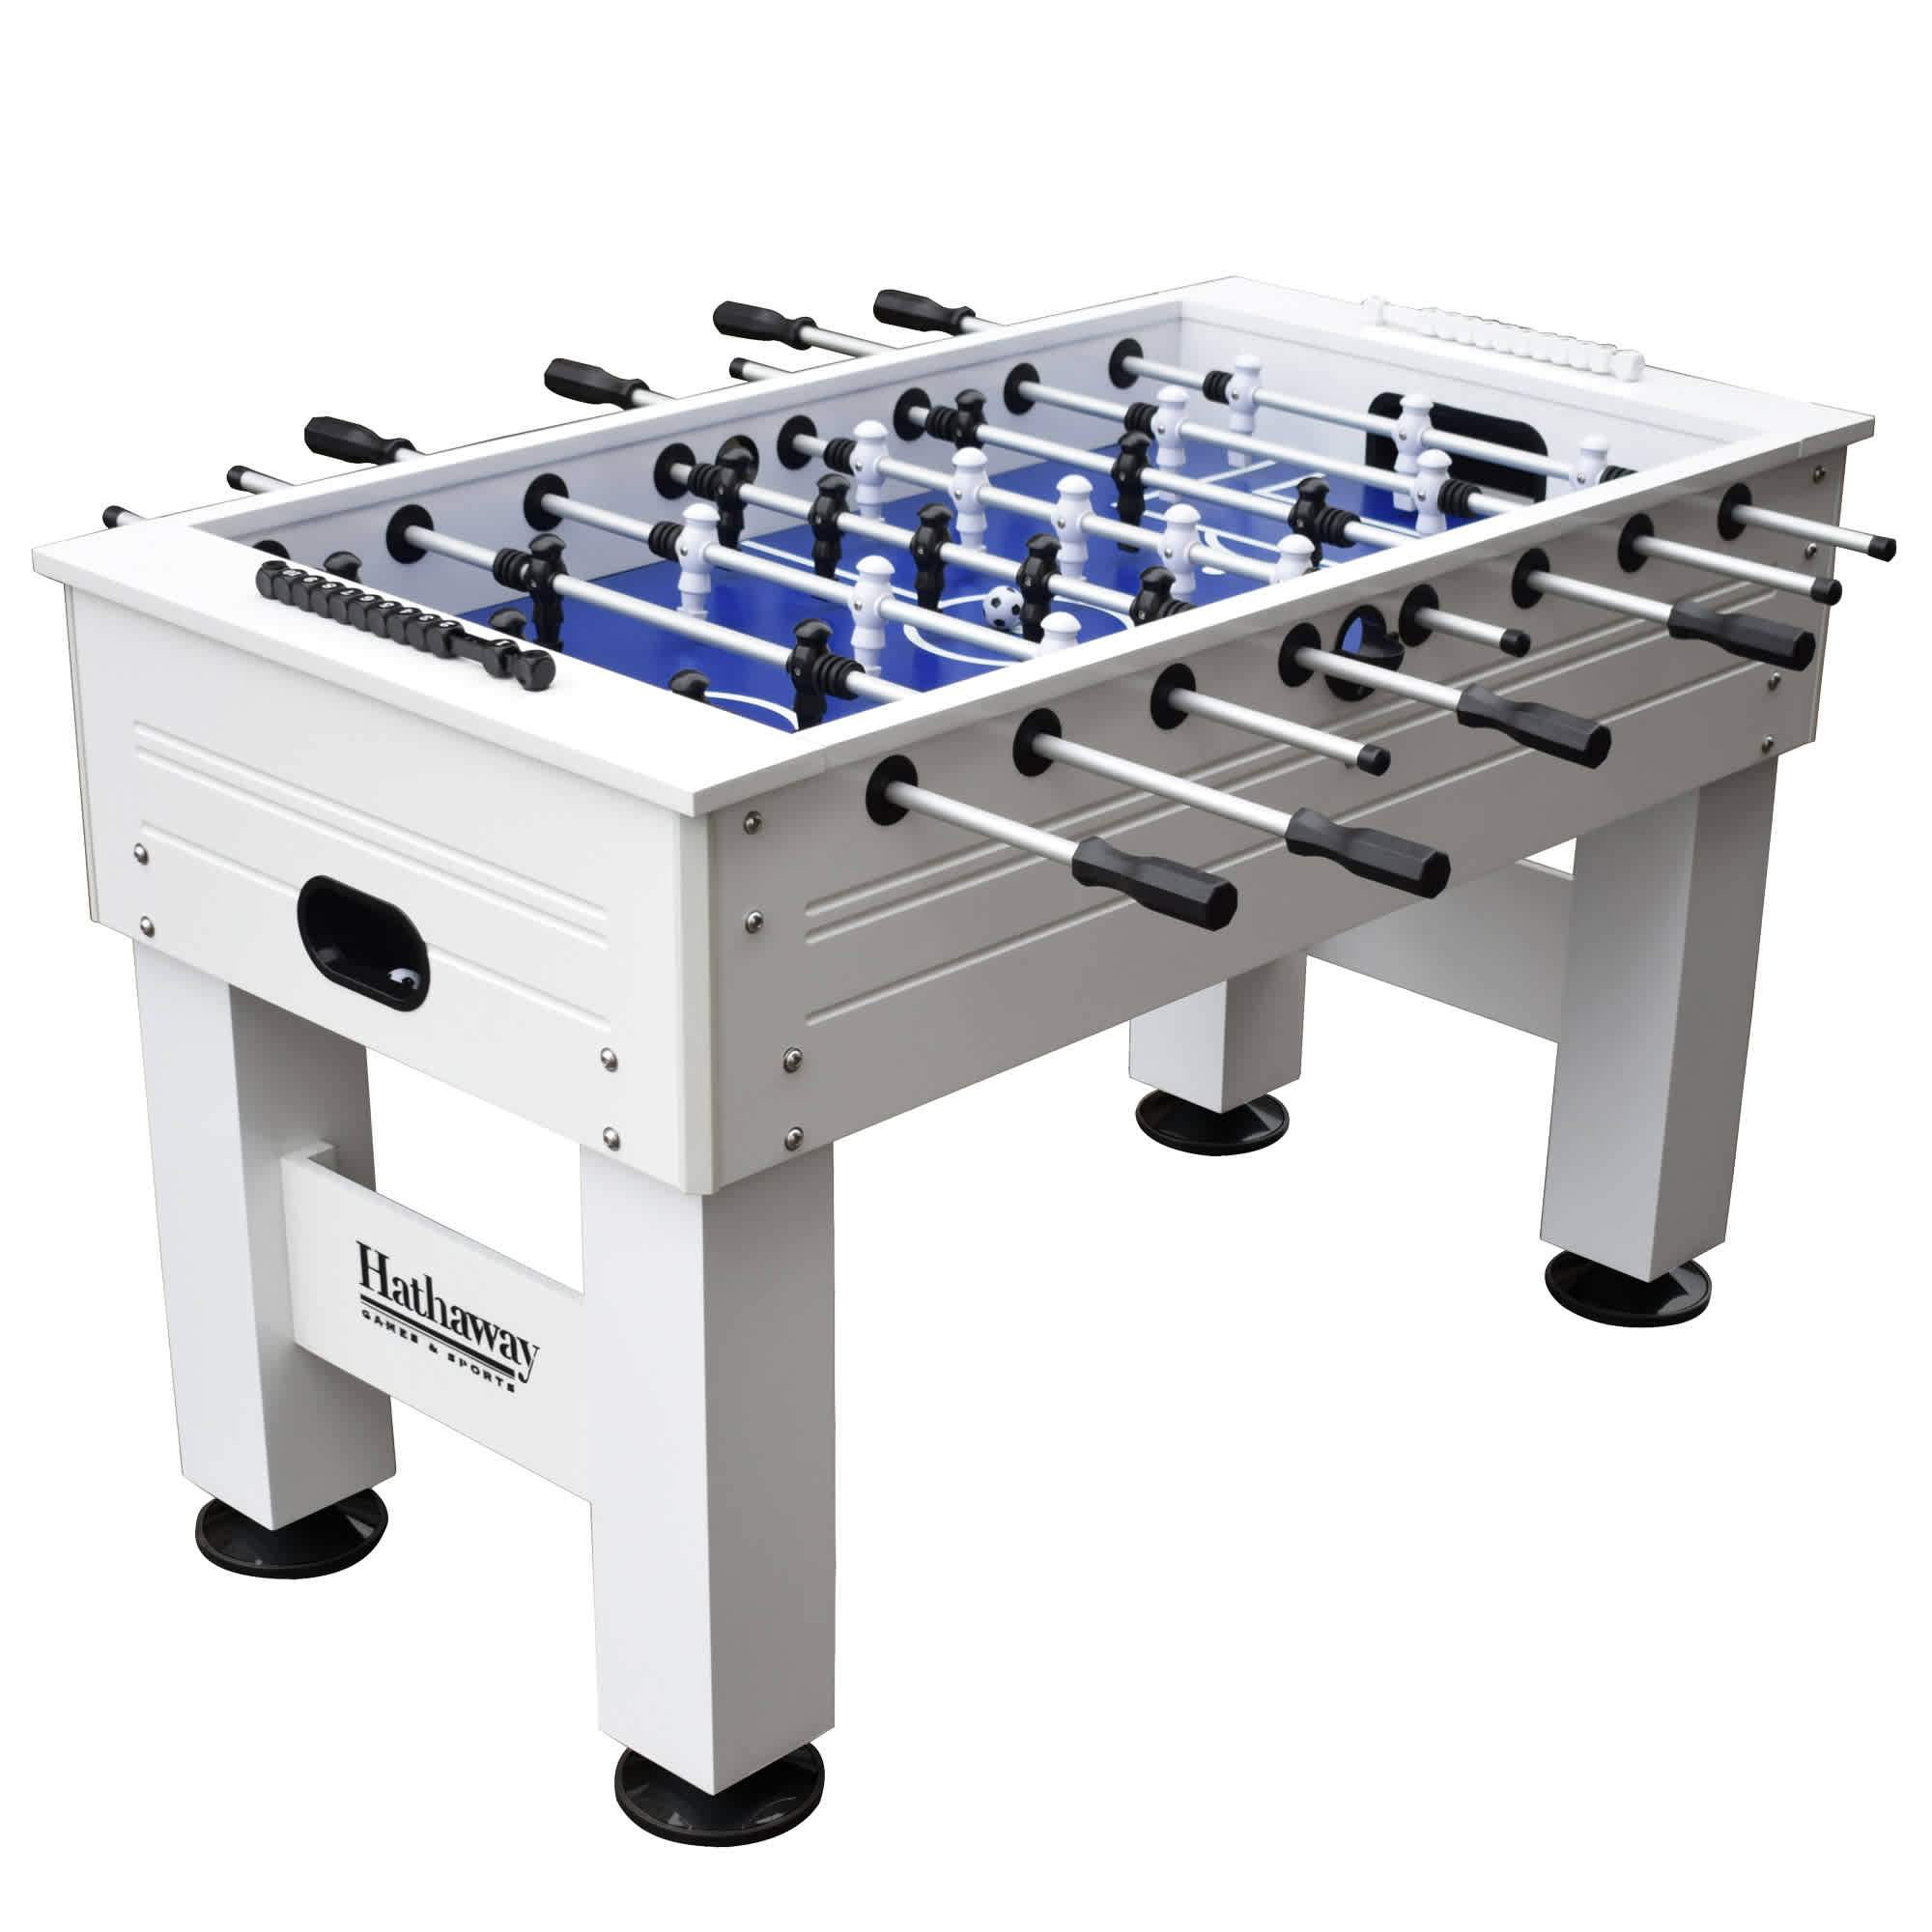  Picture of Hathaway Highlander 55'' Outdoor Foosball Table